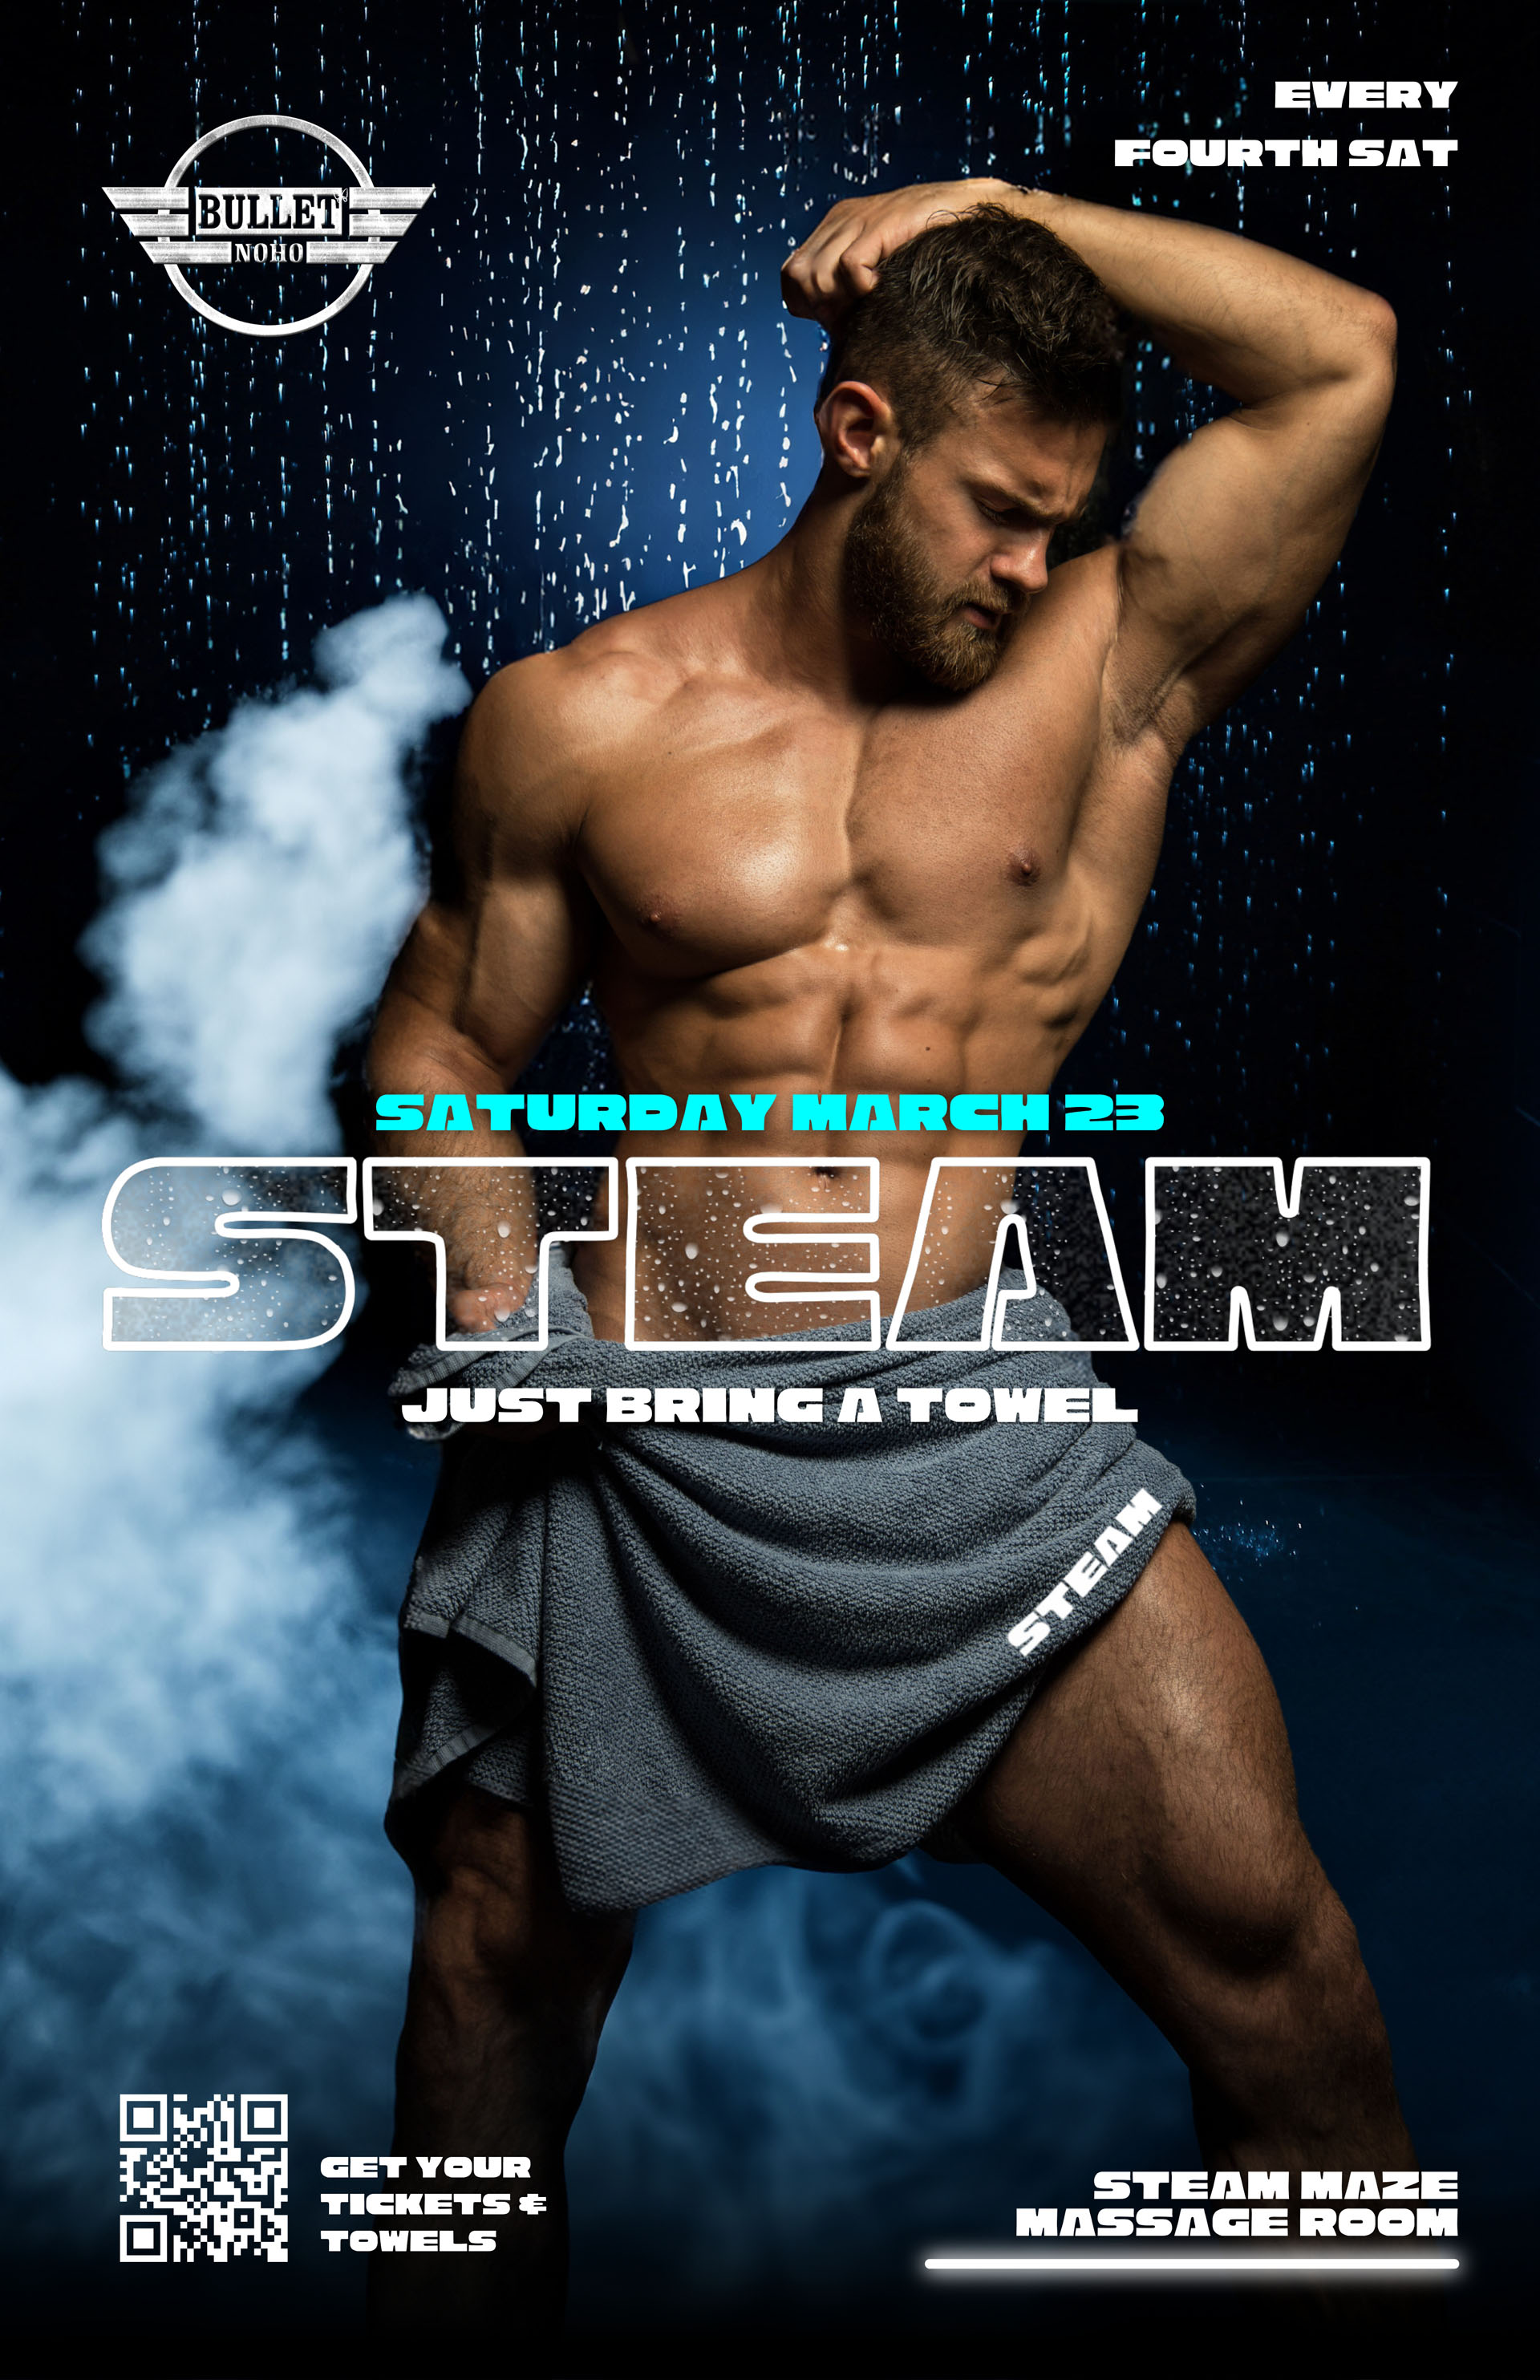 THE BULLET BAR Presents HUMP EVENTS STEAM PARTY LA: Saturday, 03/23/24 at 9:00 PM. GoGos, special guests, an extended party area and much more! A free coat check is available, and limited towels are for sale. Presale Tickets $8, or Door Cover $12. Presales: https://www.eventbrite.com/e/steam-party-la-tickets-850188575917